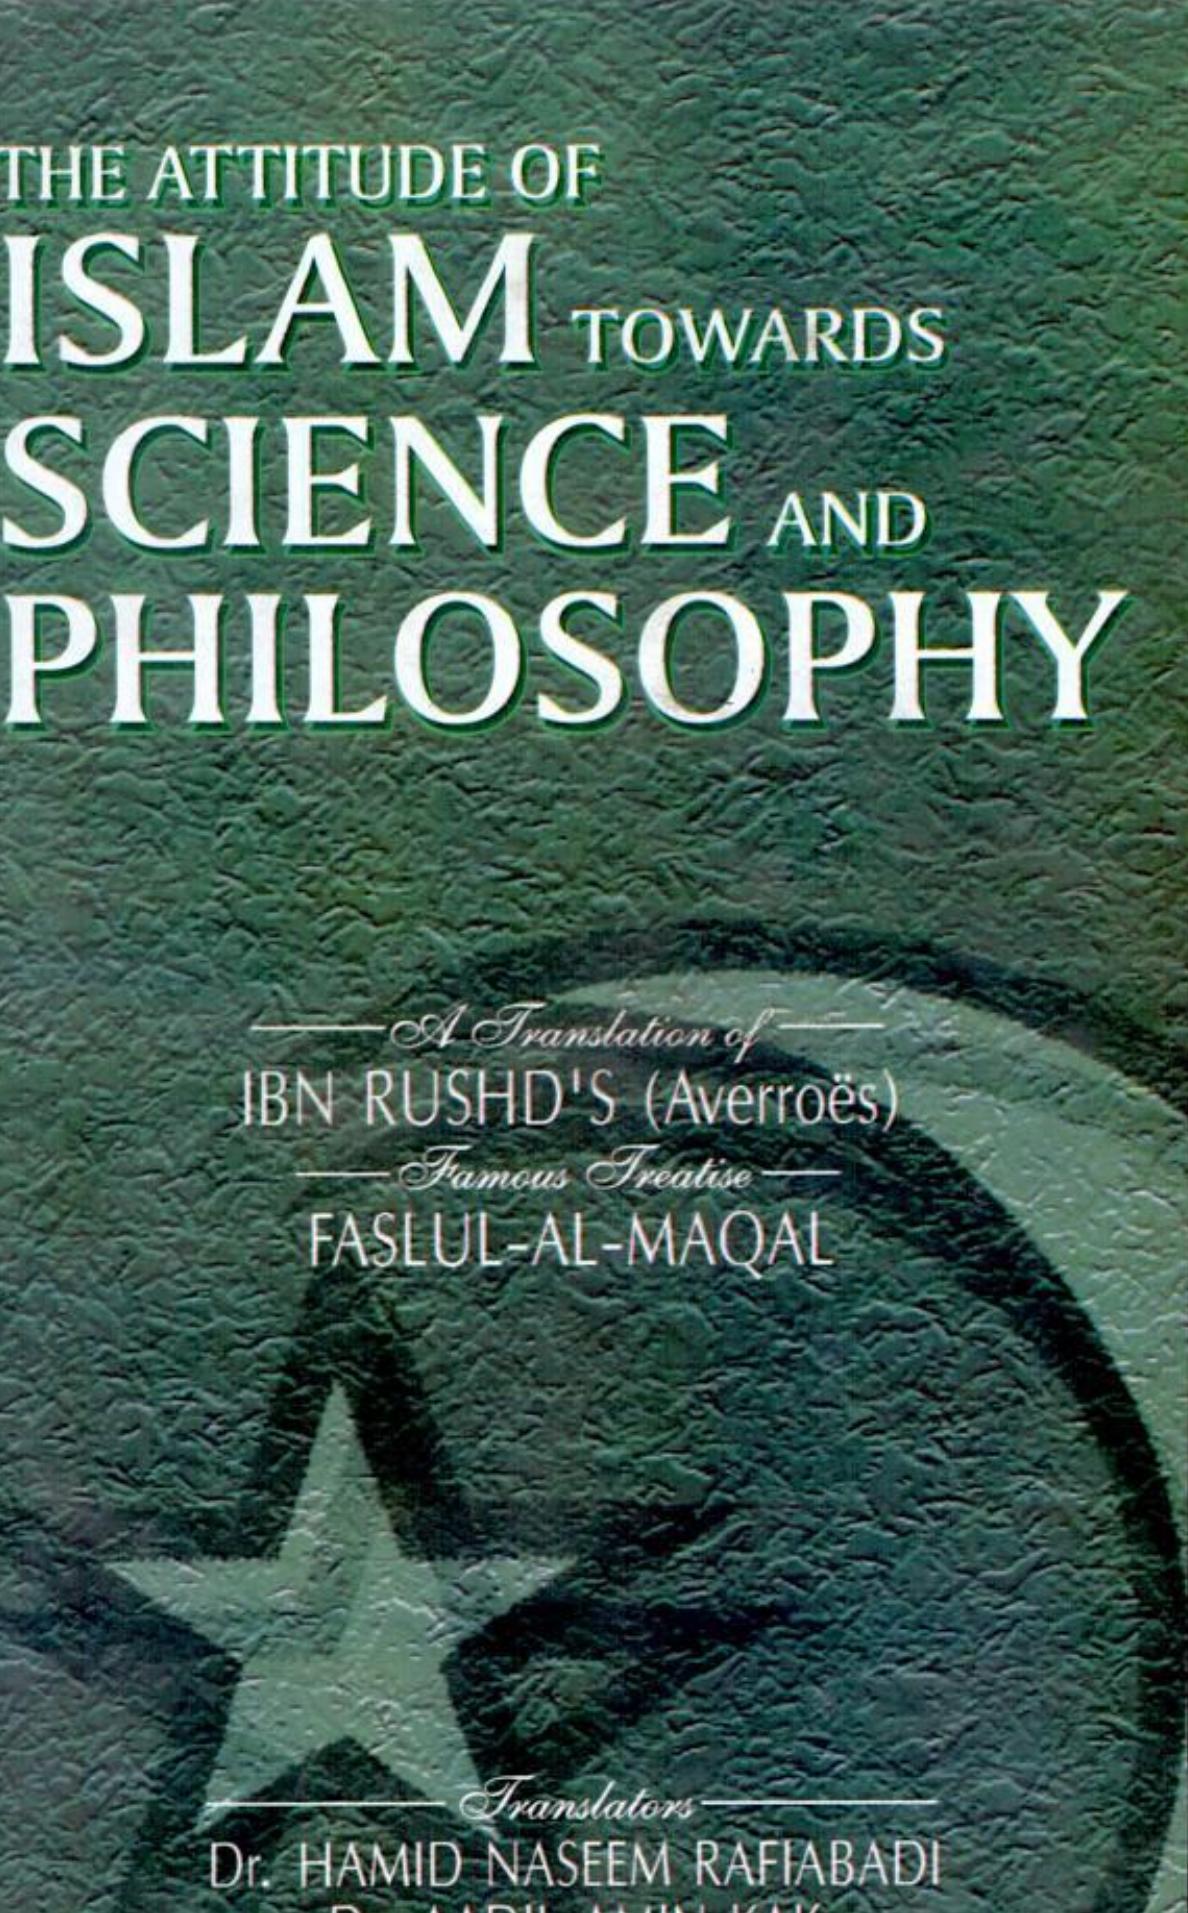 The attitude of Islam towards science and philosophy